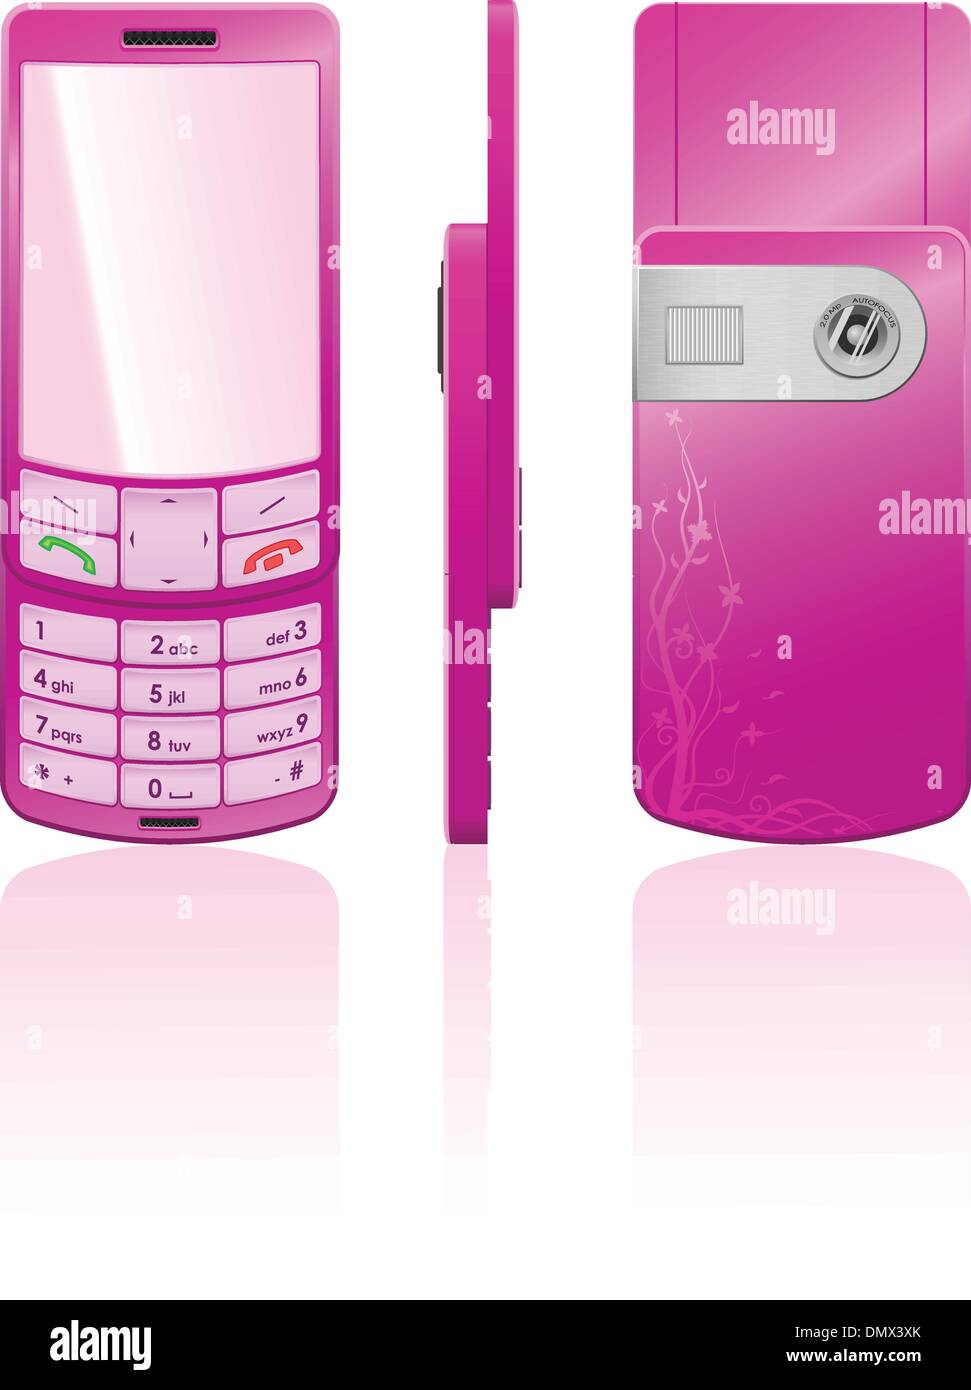 Vector illustration of a pink cellphone Stock Vector